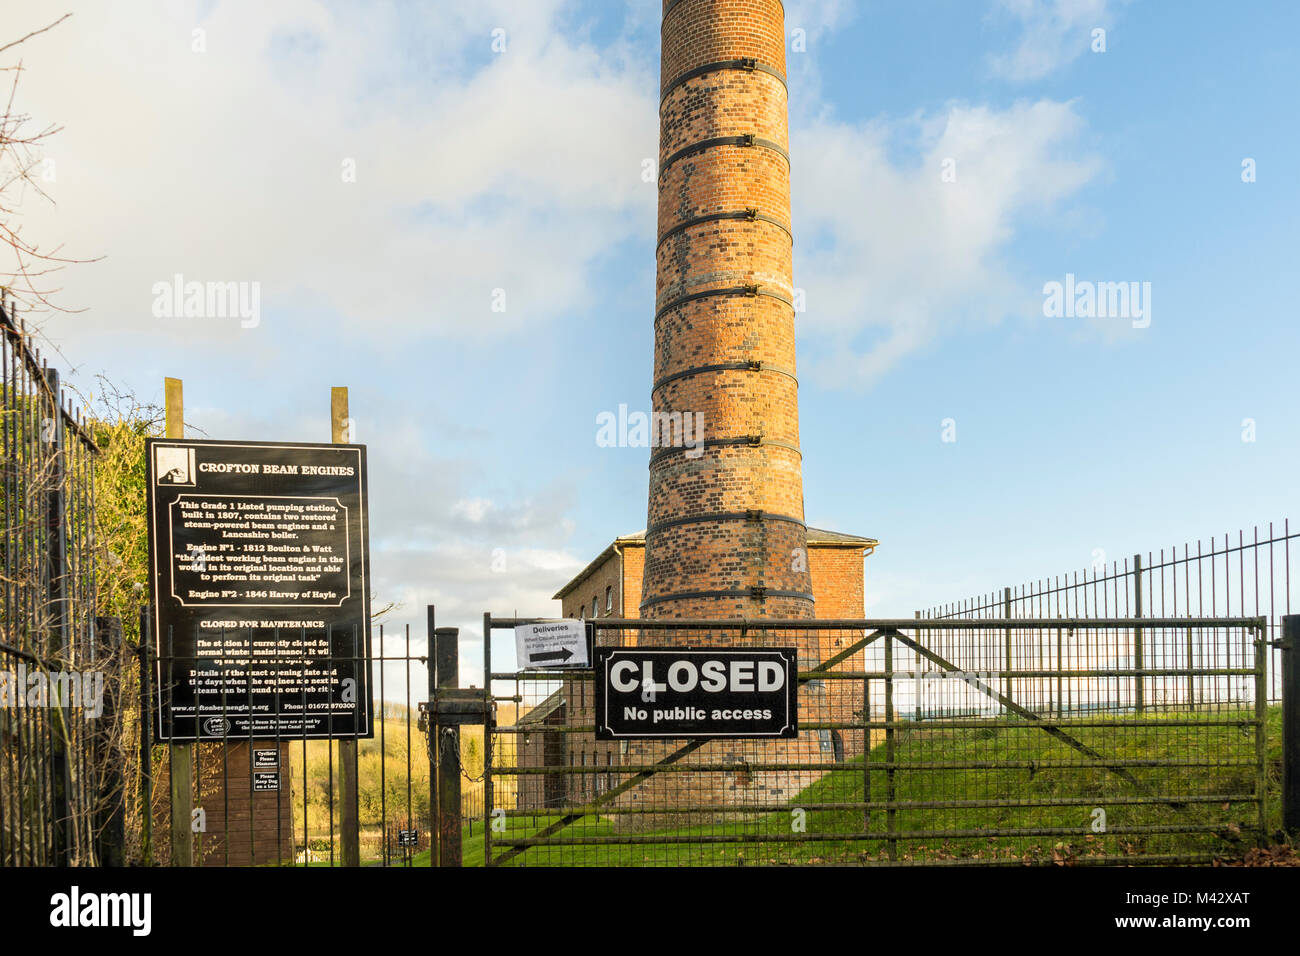 Crofton Pumping Station (Crofton Beam Engines) with its old chimney in Wiltshire, England, UK Stock Photo